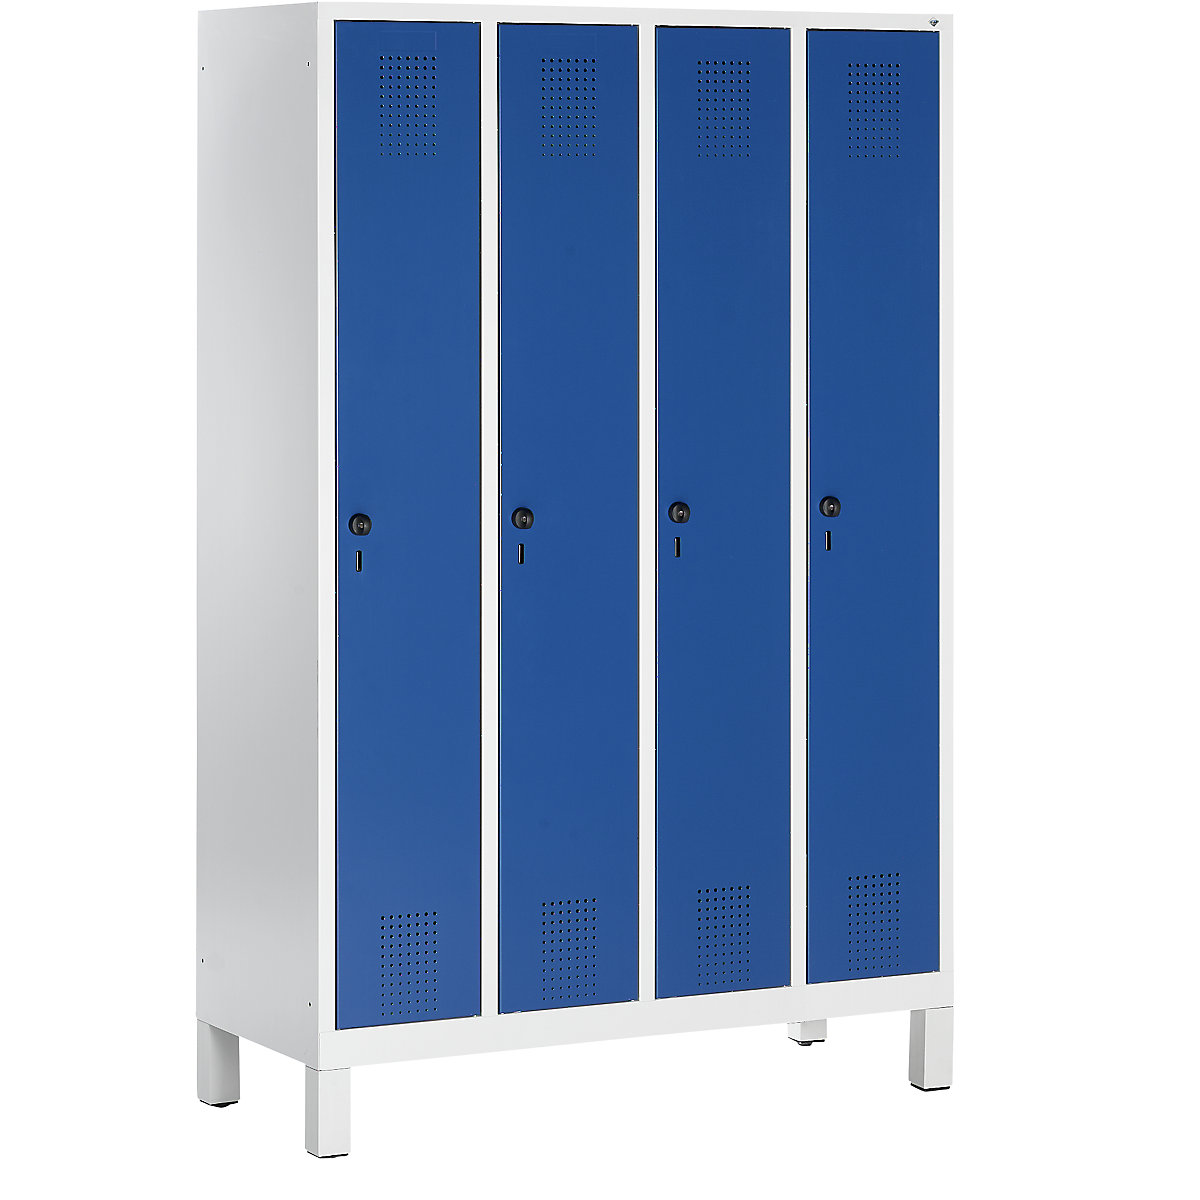 EVOLO cloakroom locker – C+P, with plastic feet, 4 compartments, compartment width 300 mm, light grey / gentian blue